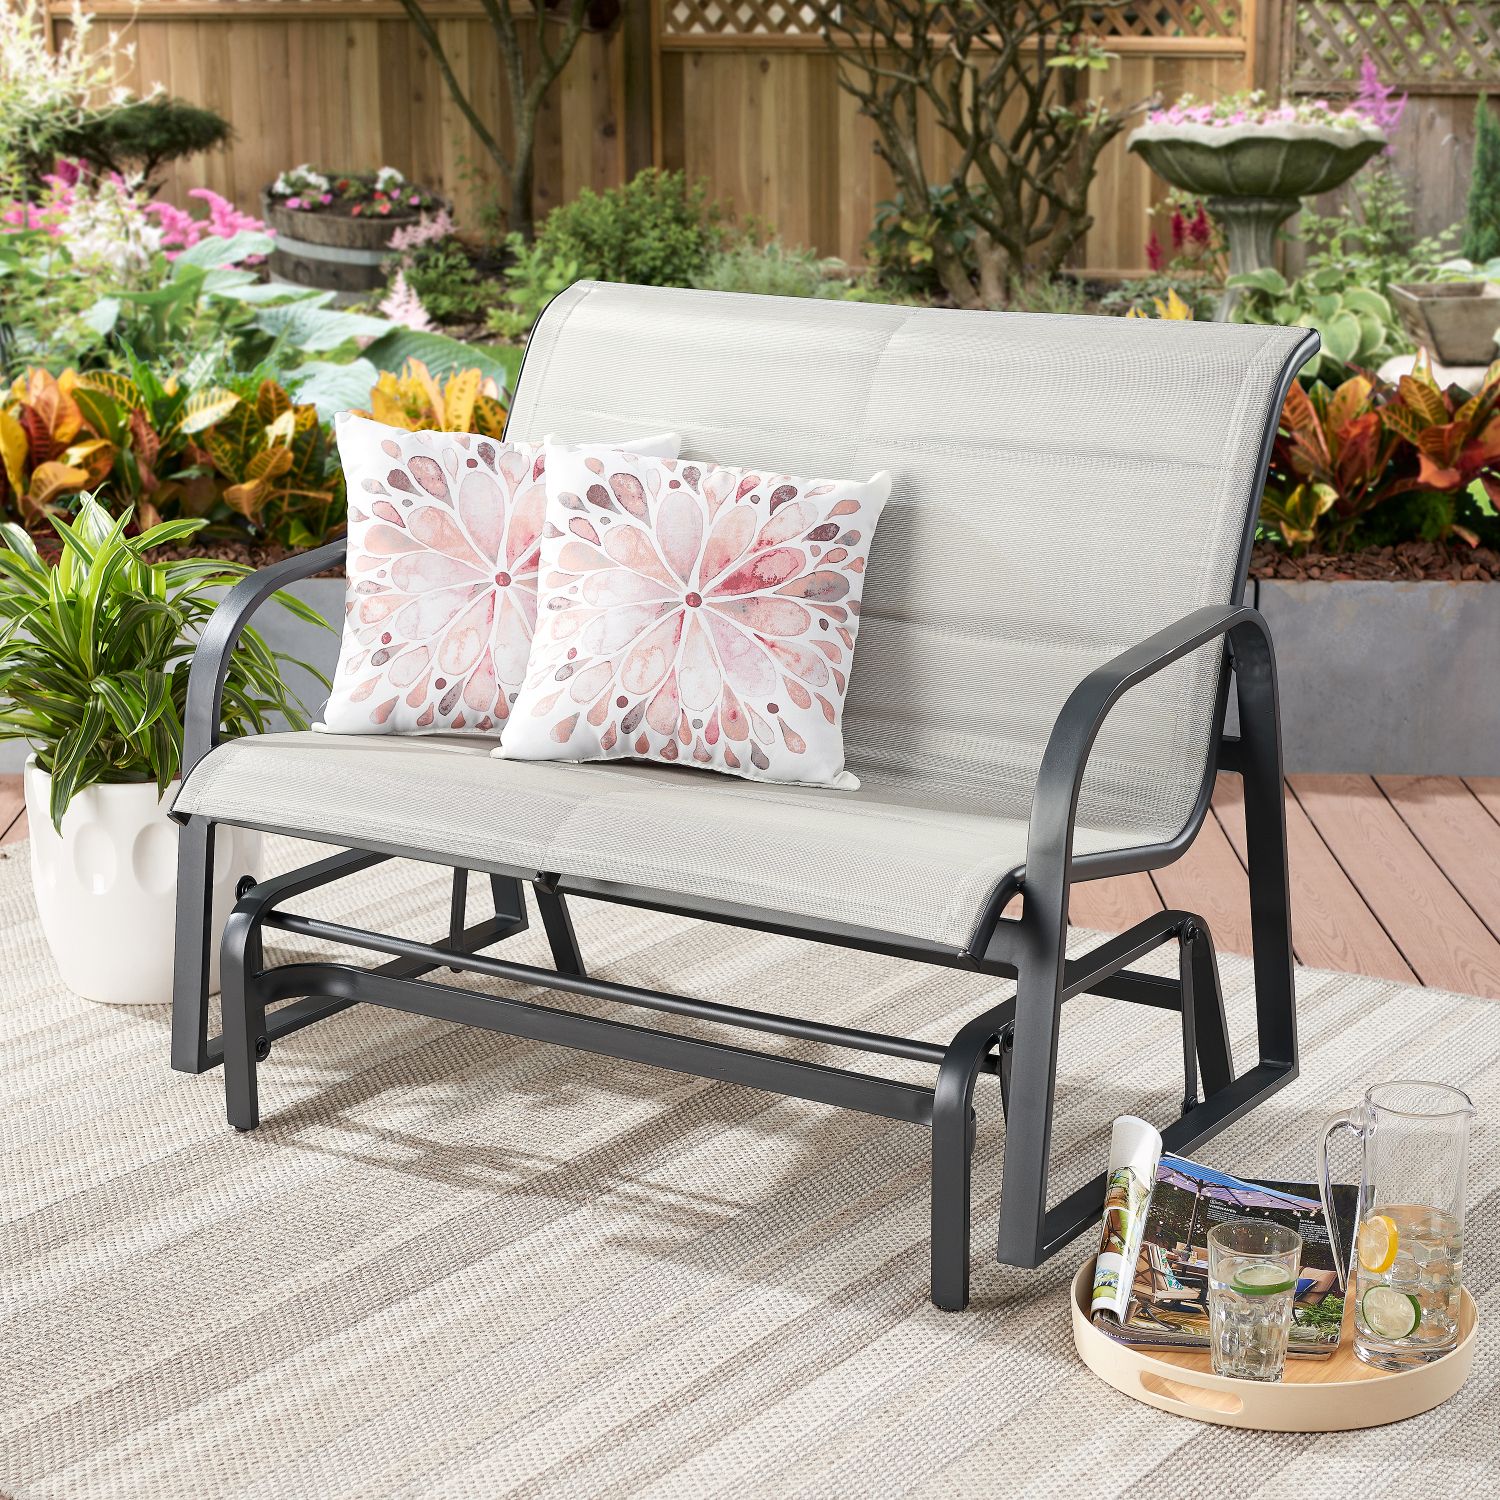 Details About Montrose Padded Sling Glider Bench Outdoor Garden Patio Porch  Furniture Chair Regarding Padded Sling Loveseats With Cushions (View 14 of 25)